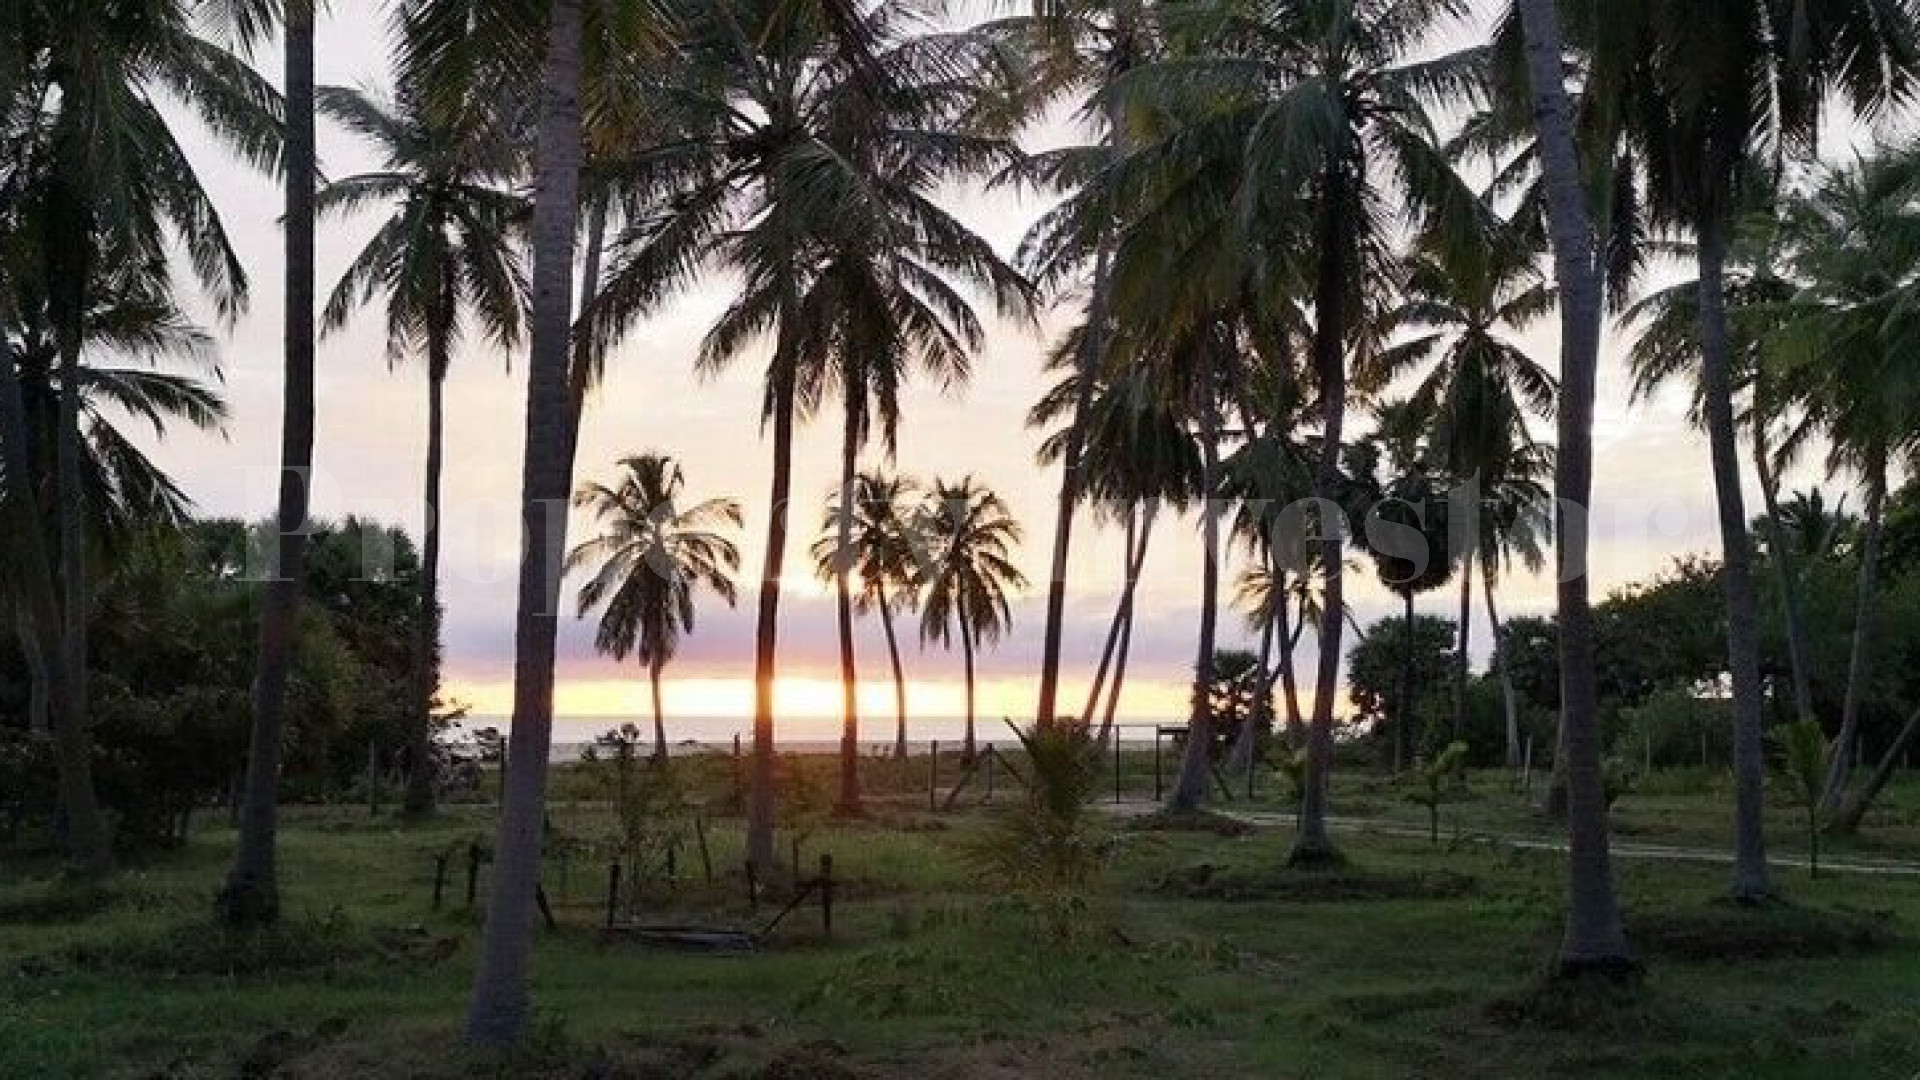 Exclusive 1 Hectare Beachfront Parcel of Land for Sale on a Private Peninsula in Sri Lanka